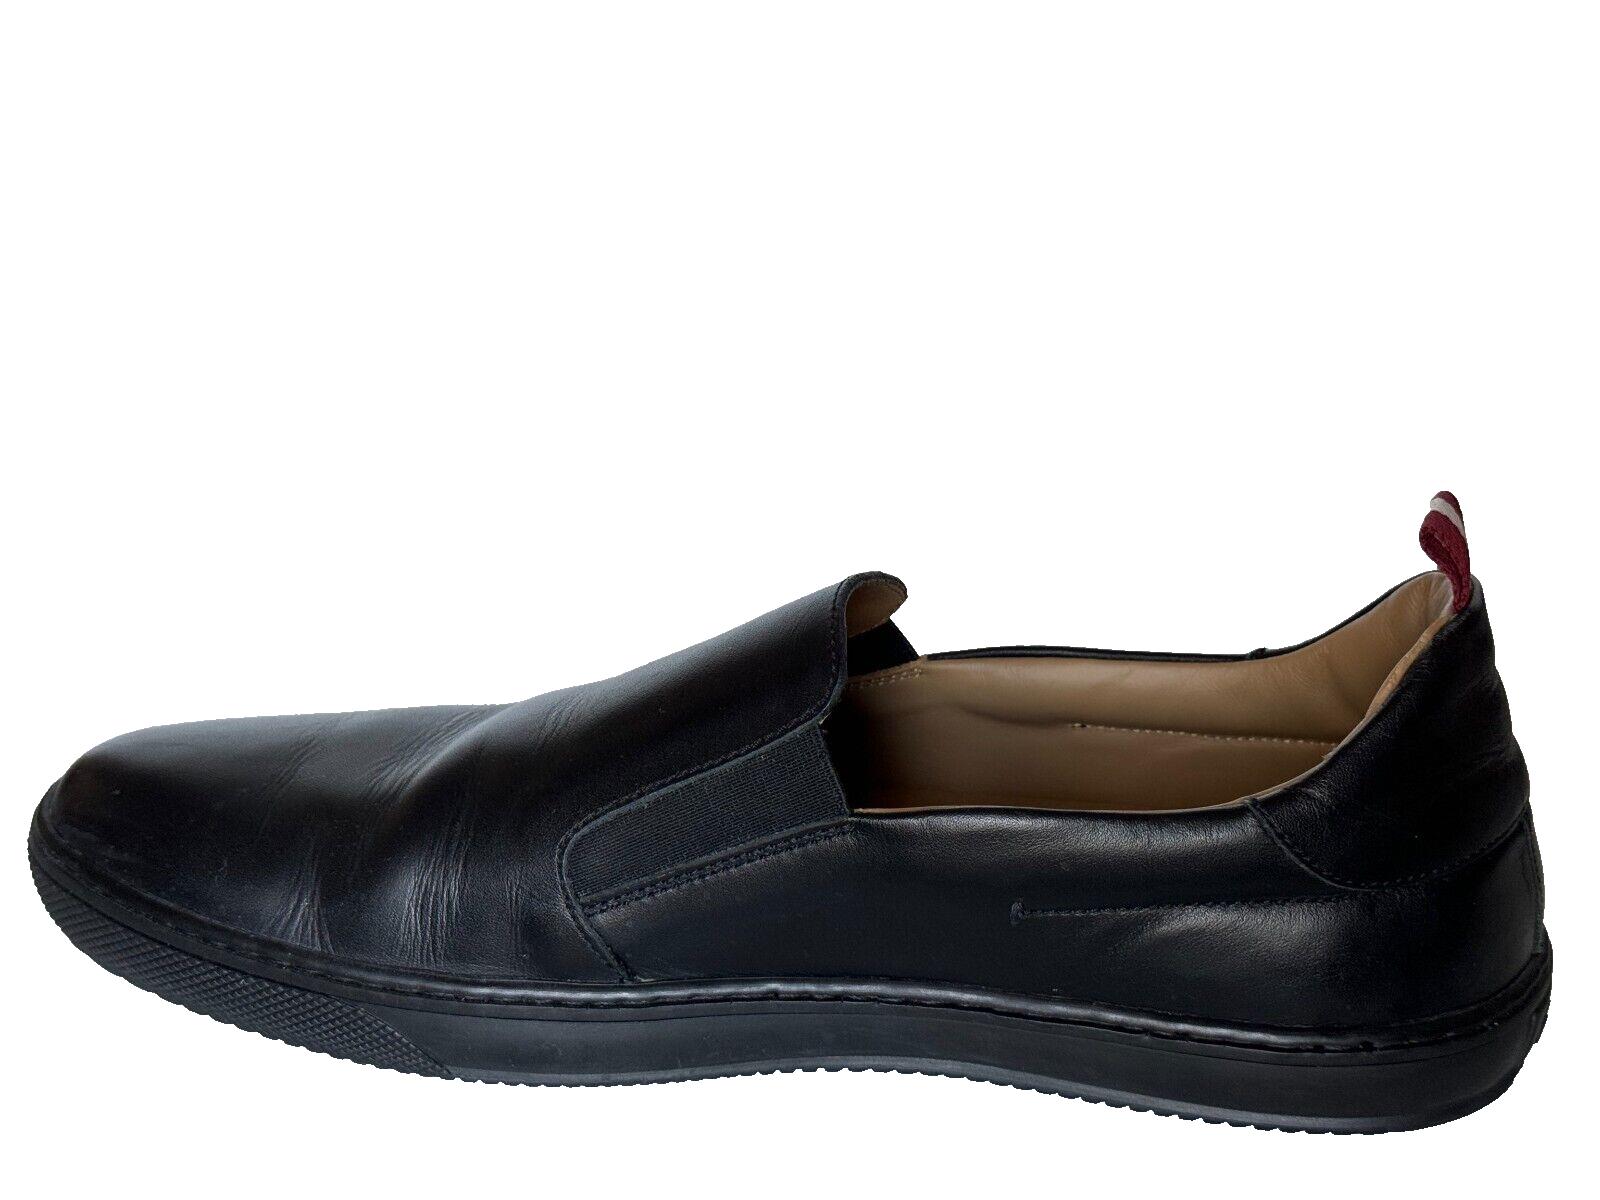 Bally Men's Calf Leather Driver Shoes Loafers Black 10 US Made in Italy